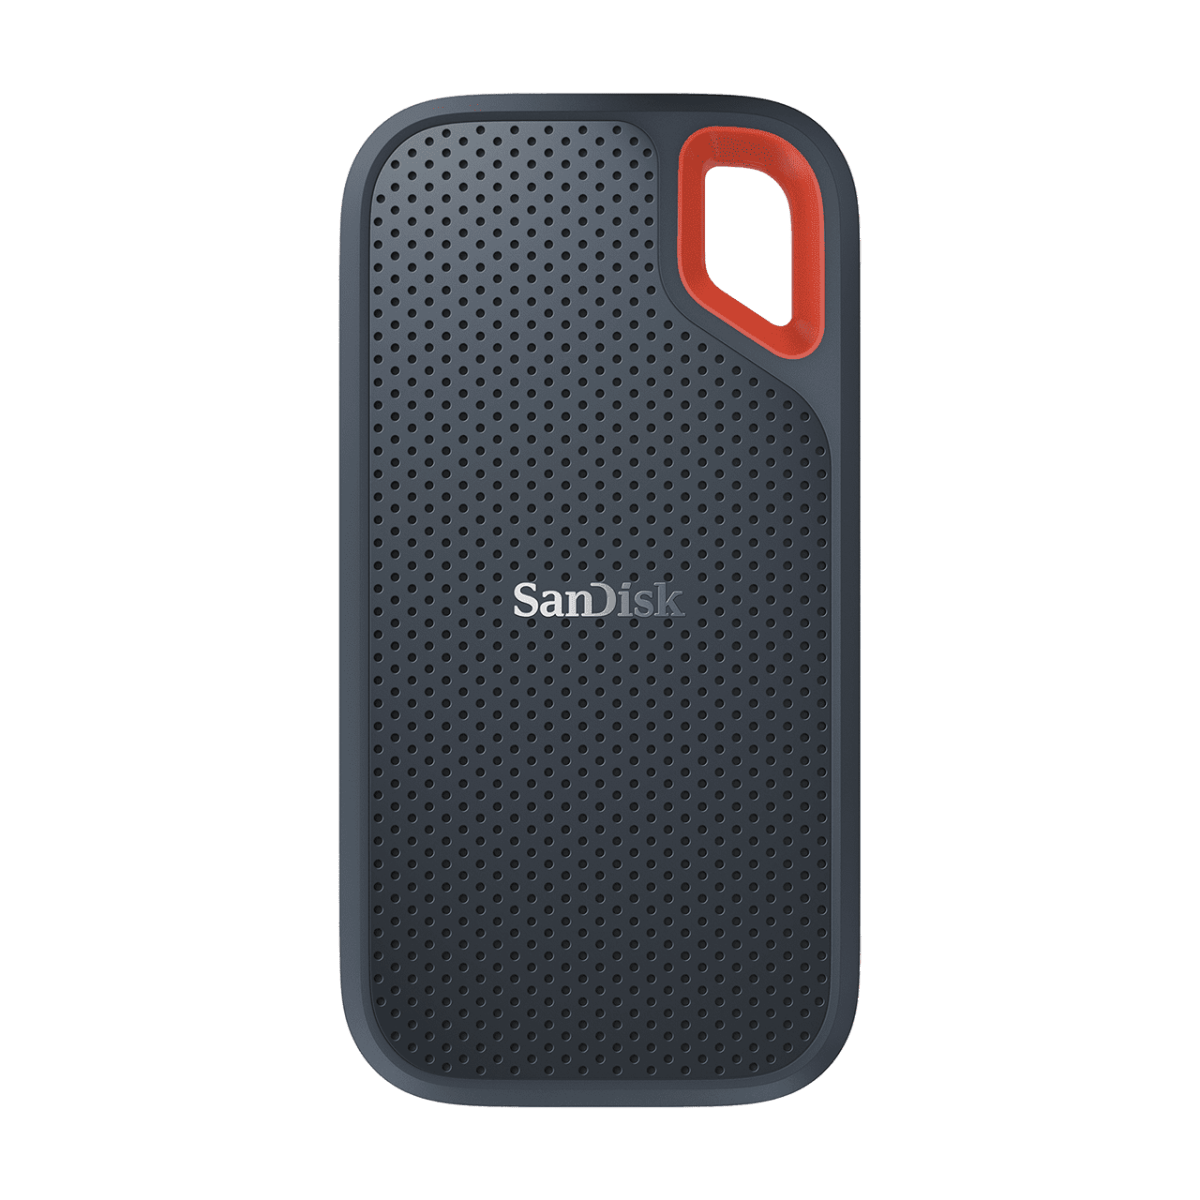 Extreme Usb 3 1 Ssd Angled Front.png.thumb .1280.1280 Sandisk &Lt;H1&Gt;Speed Up The Flow. Move Files Faster.&Lt;/H1&Gt; &Lt;Div Class=&Quot;Inheritpara Mb-4&Quot;&Gt; The Rugged Sandisk® Extreme Portable Ssd Delivers High-Speed Transfers With Up To 550Mb/S Read Speeds. This Makes It Perfect For Saving And Editing Hi-Res Photos And Videos. With An Ip55 Rating, It Also Stands Up To Rain, Splashes, Spills, And Dust. &Lt;/Div&Gt; &Lt;Strong&Gt;3-Year Sandisk Limited Warranty&Lt;/Strong&Gt; [Embed]Https://Youtu.be/On0B70Waom8[/Embed] Sandisk Extreme Portable Ssd 1 Tb (Rain, Splashes, Spills, And Dust Resistance)